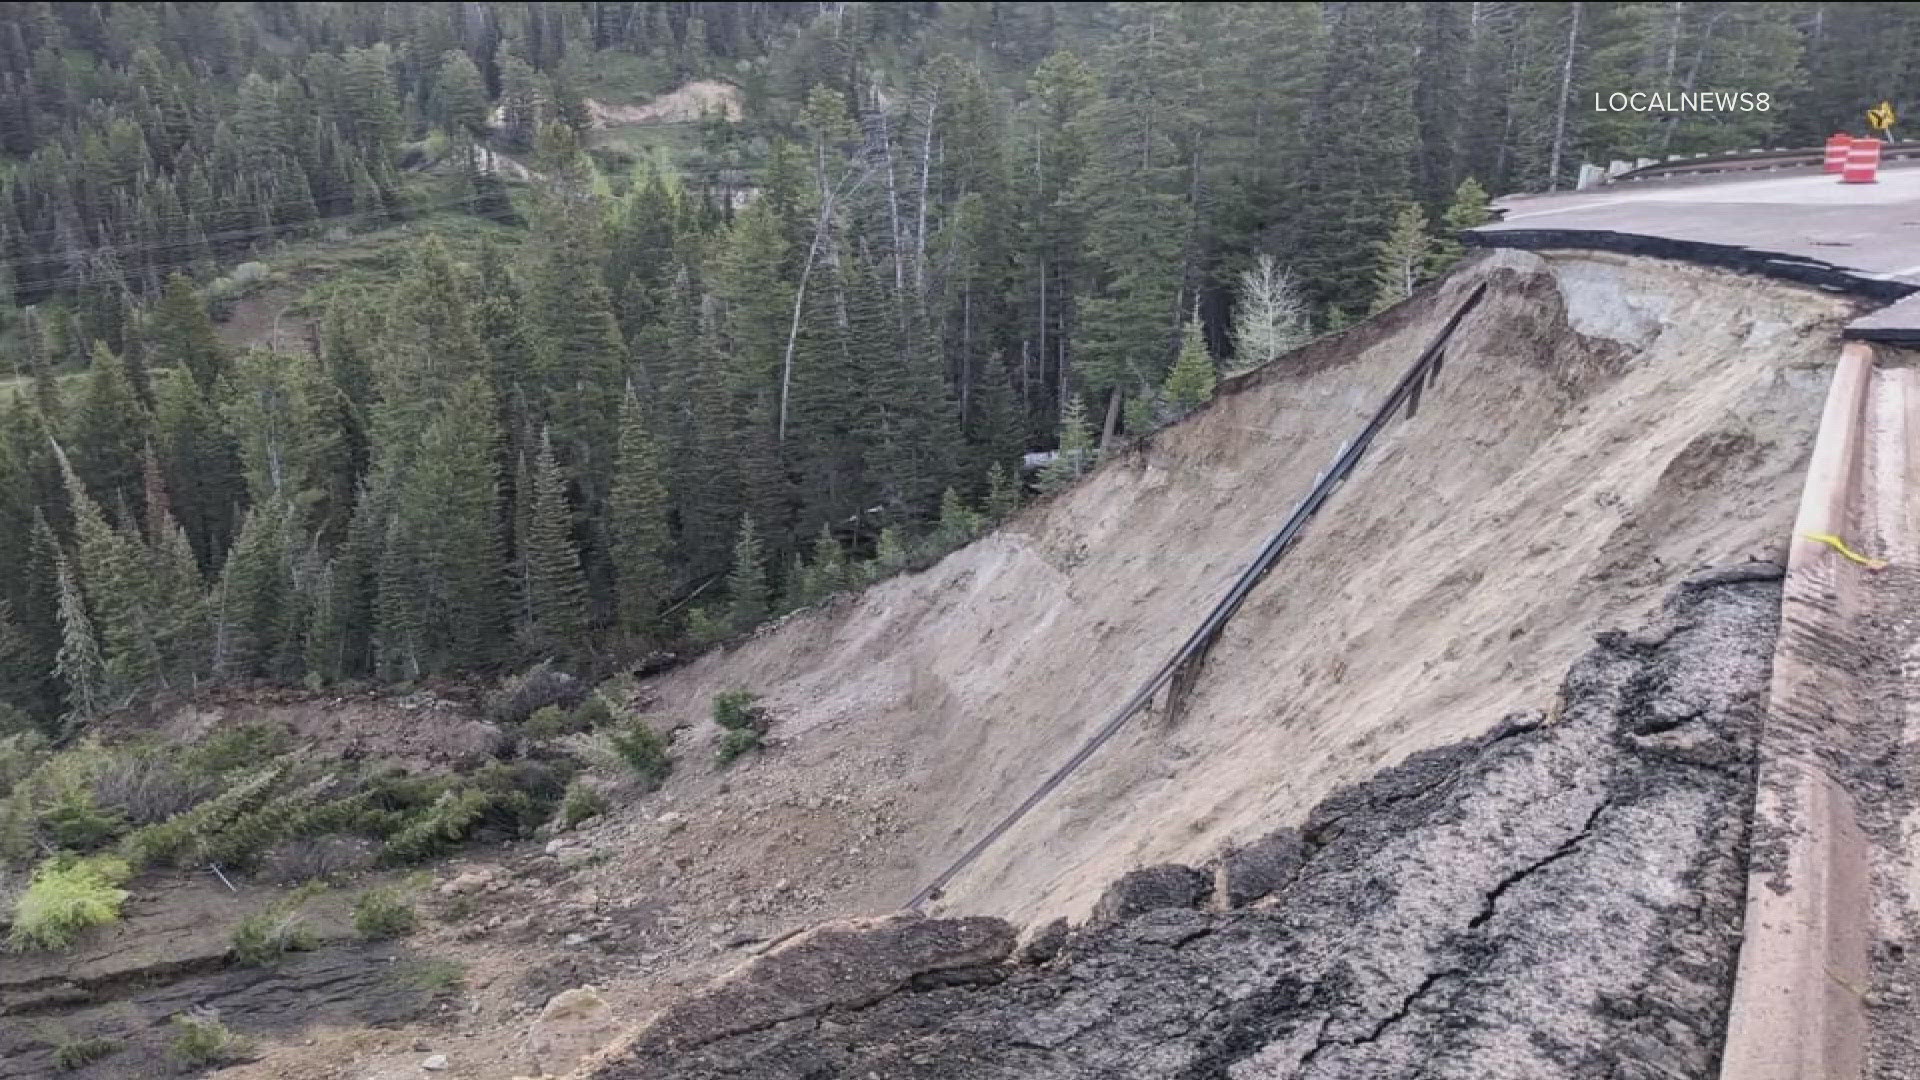 The pass connects Idaho and Wyoming and was already closed from a mudslide. No one was hurt but long-term closure is expected.